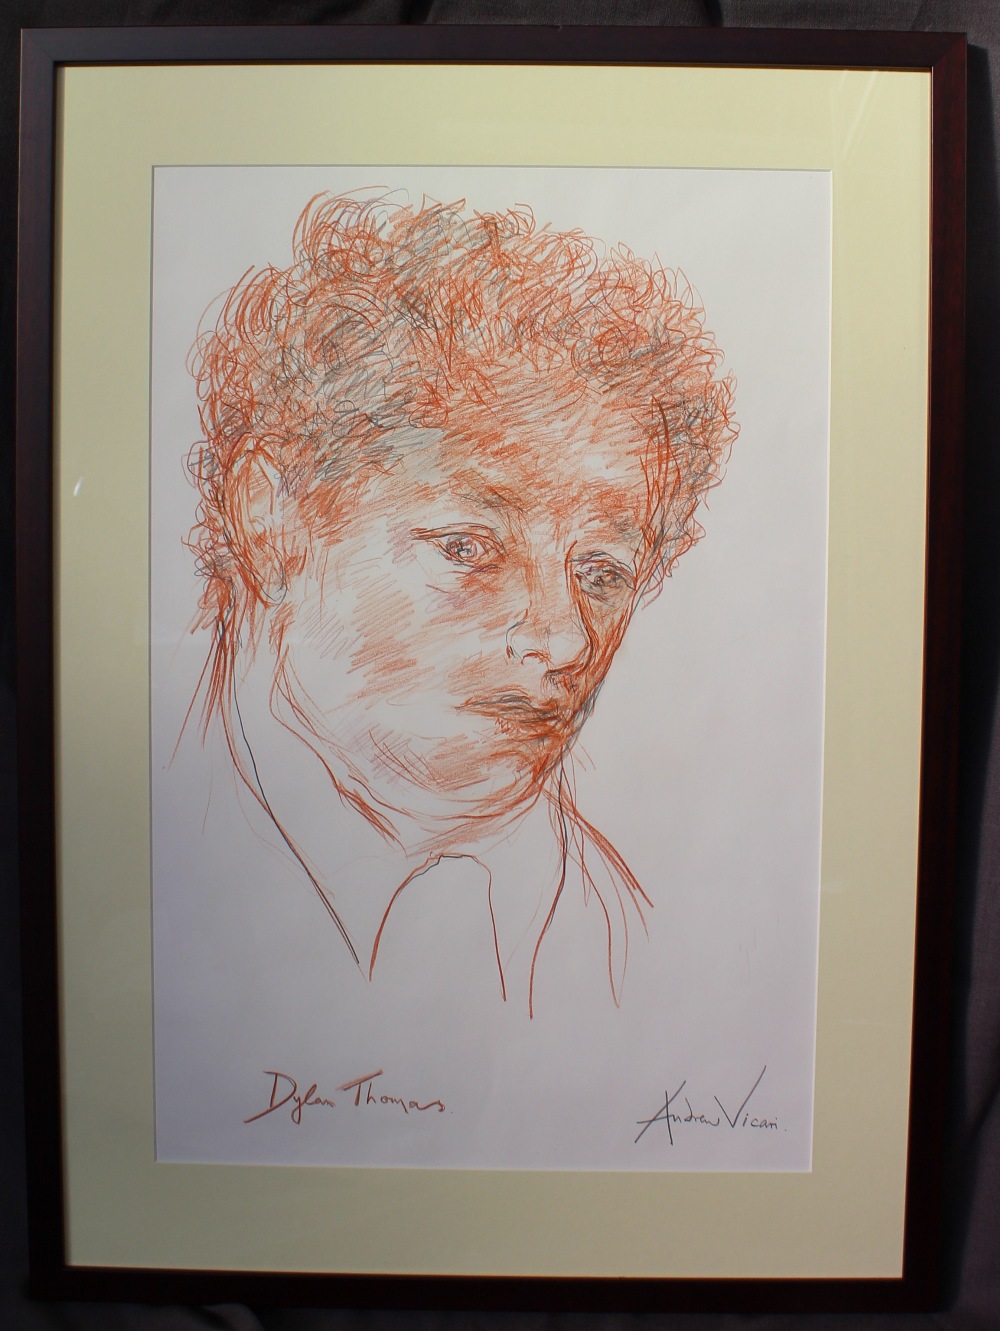 Andrew Vicari
Dylan Thomas
A head and shoulders portrait
Pastel
Signed and inscribed
Andrew Vicari - Image 2 of 6